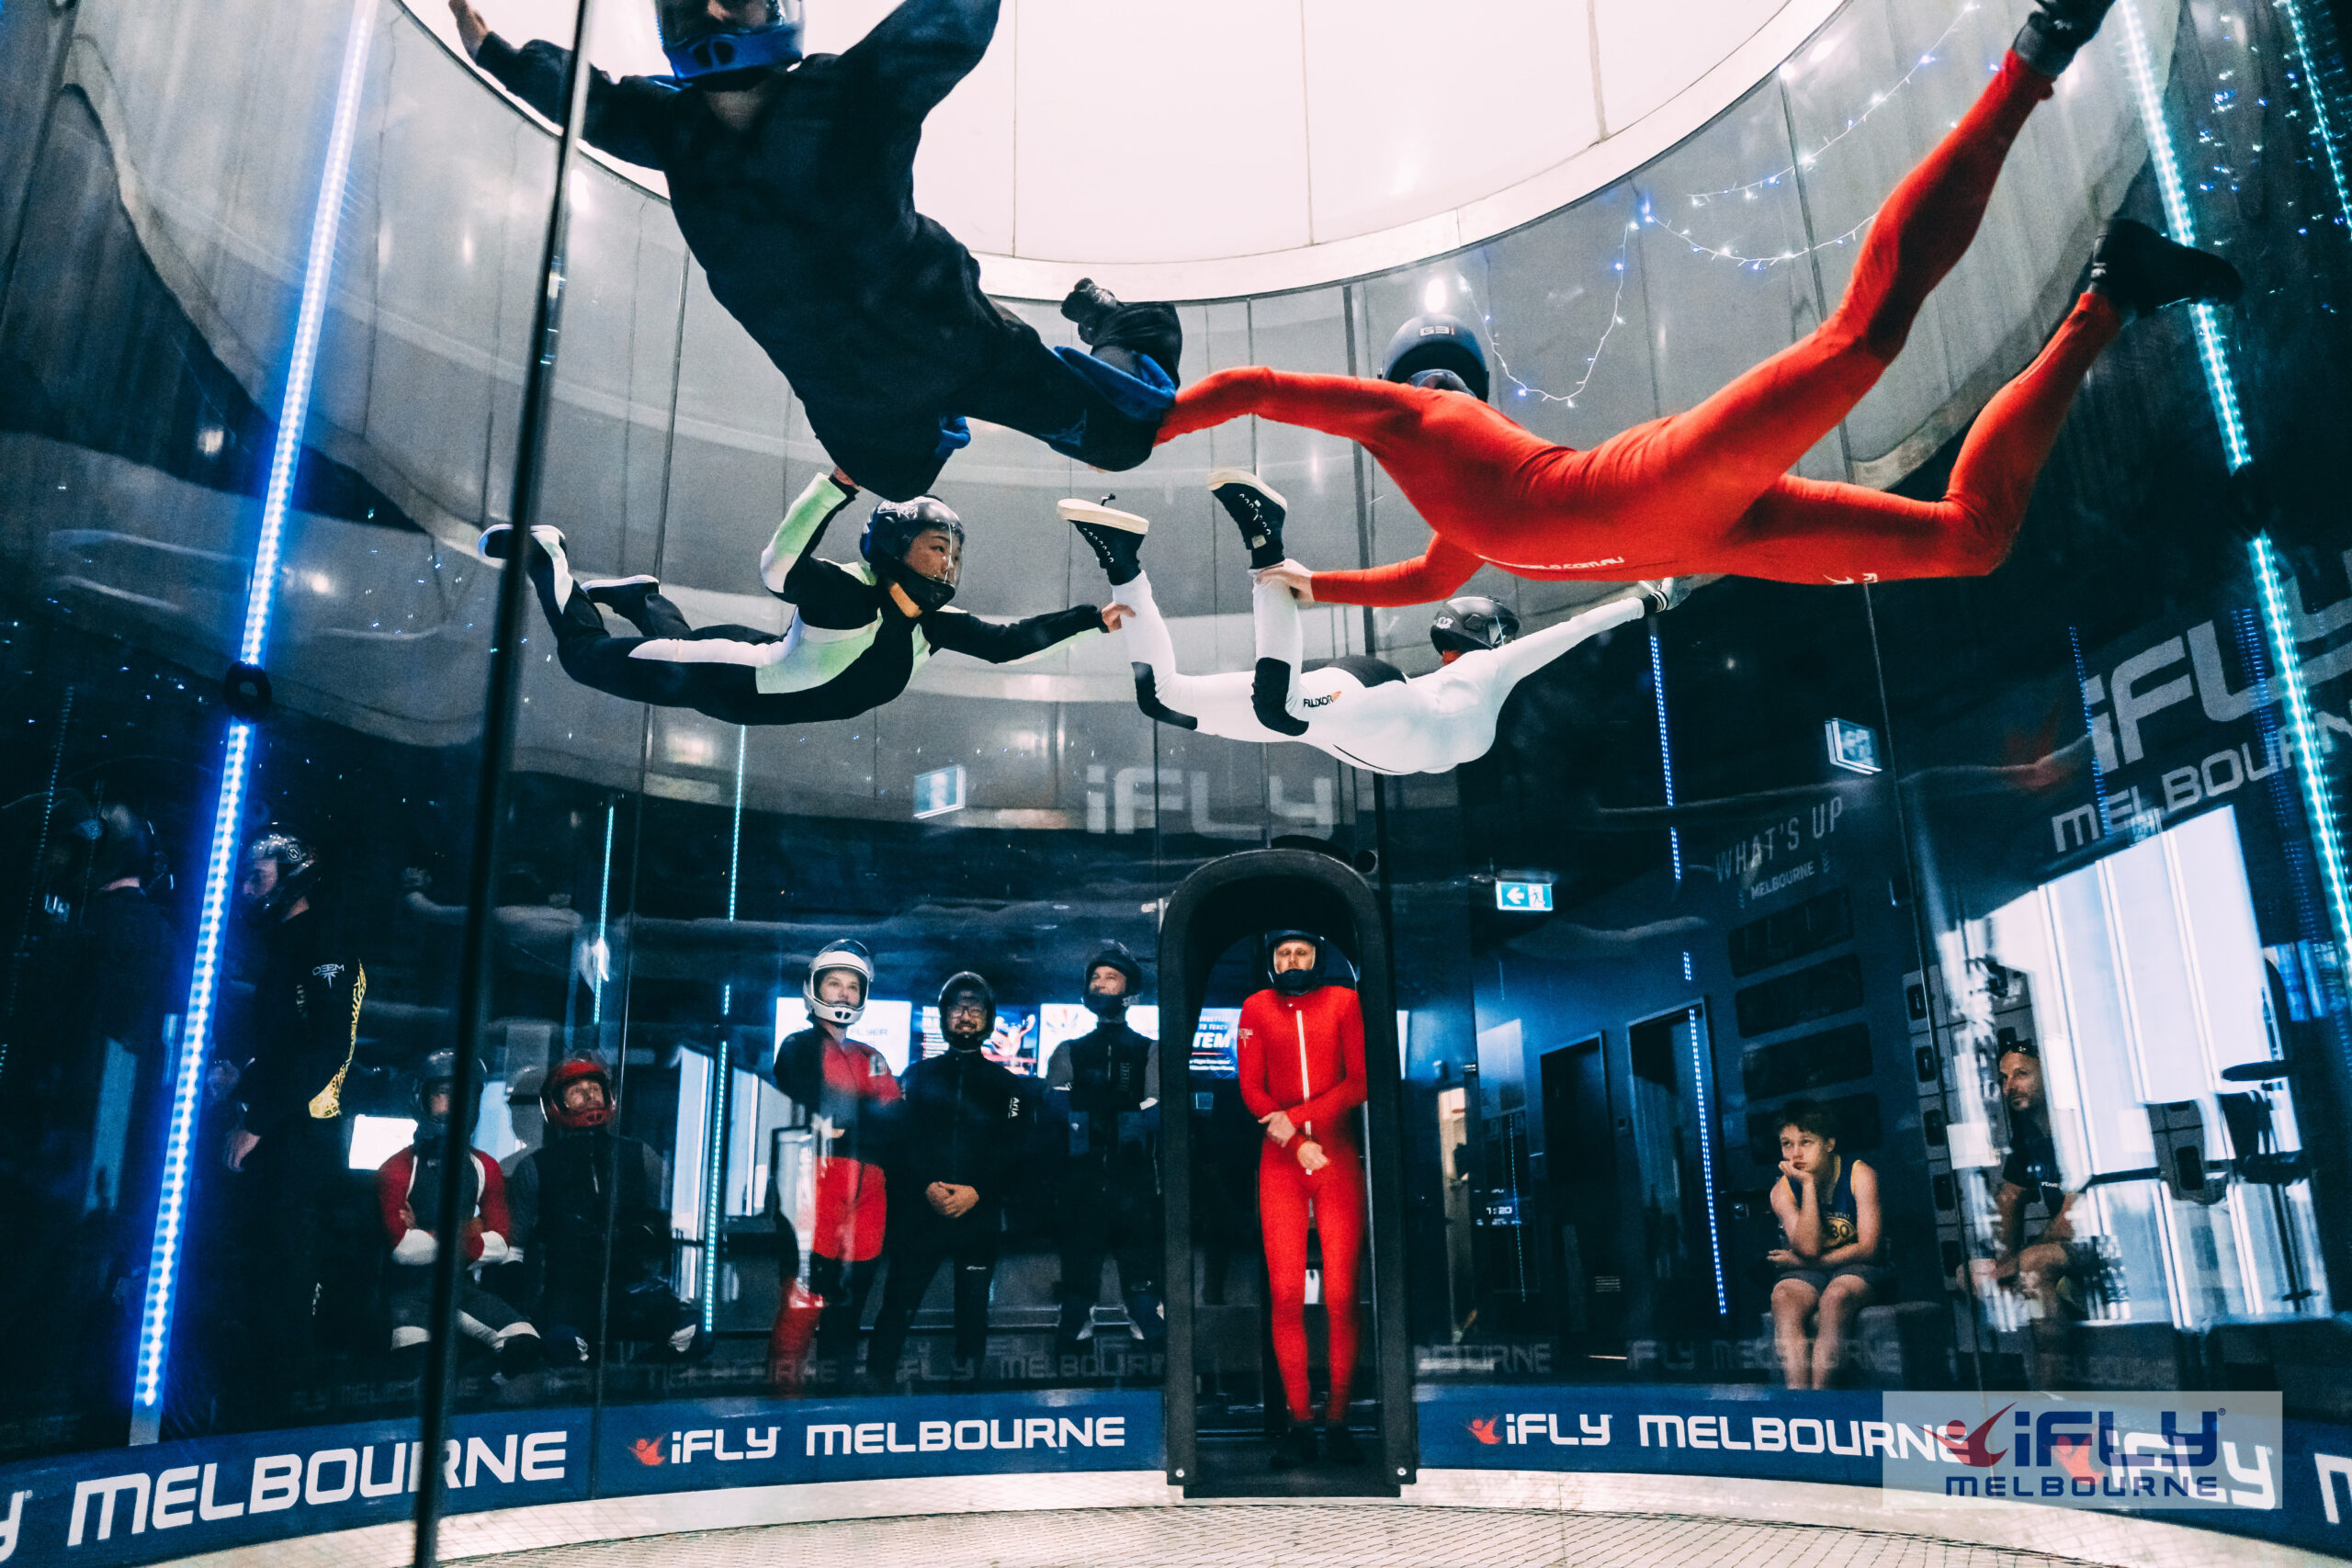 iFly Melbourne with group of four flyers performing